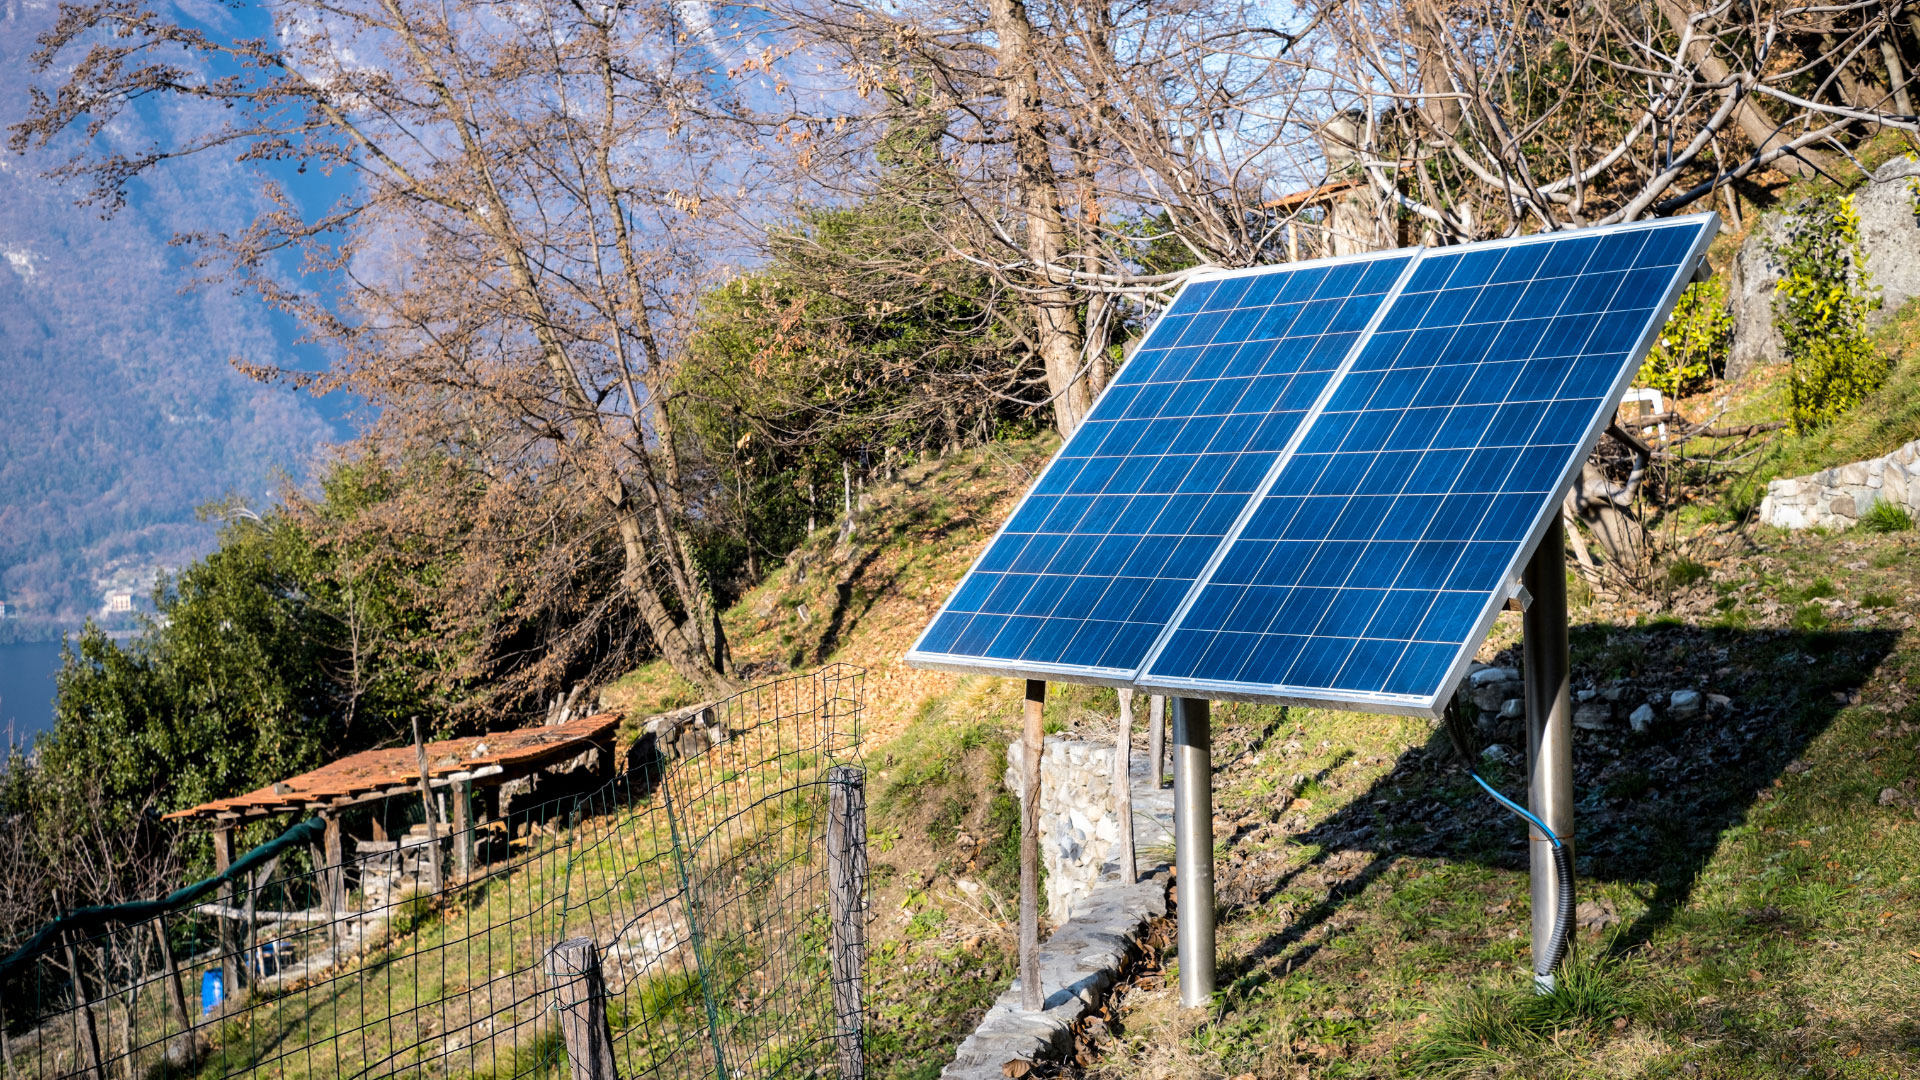 Can You Live Off-Grid in Florida With Solar?